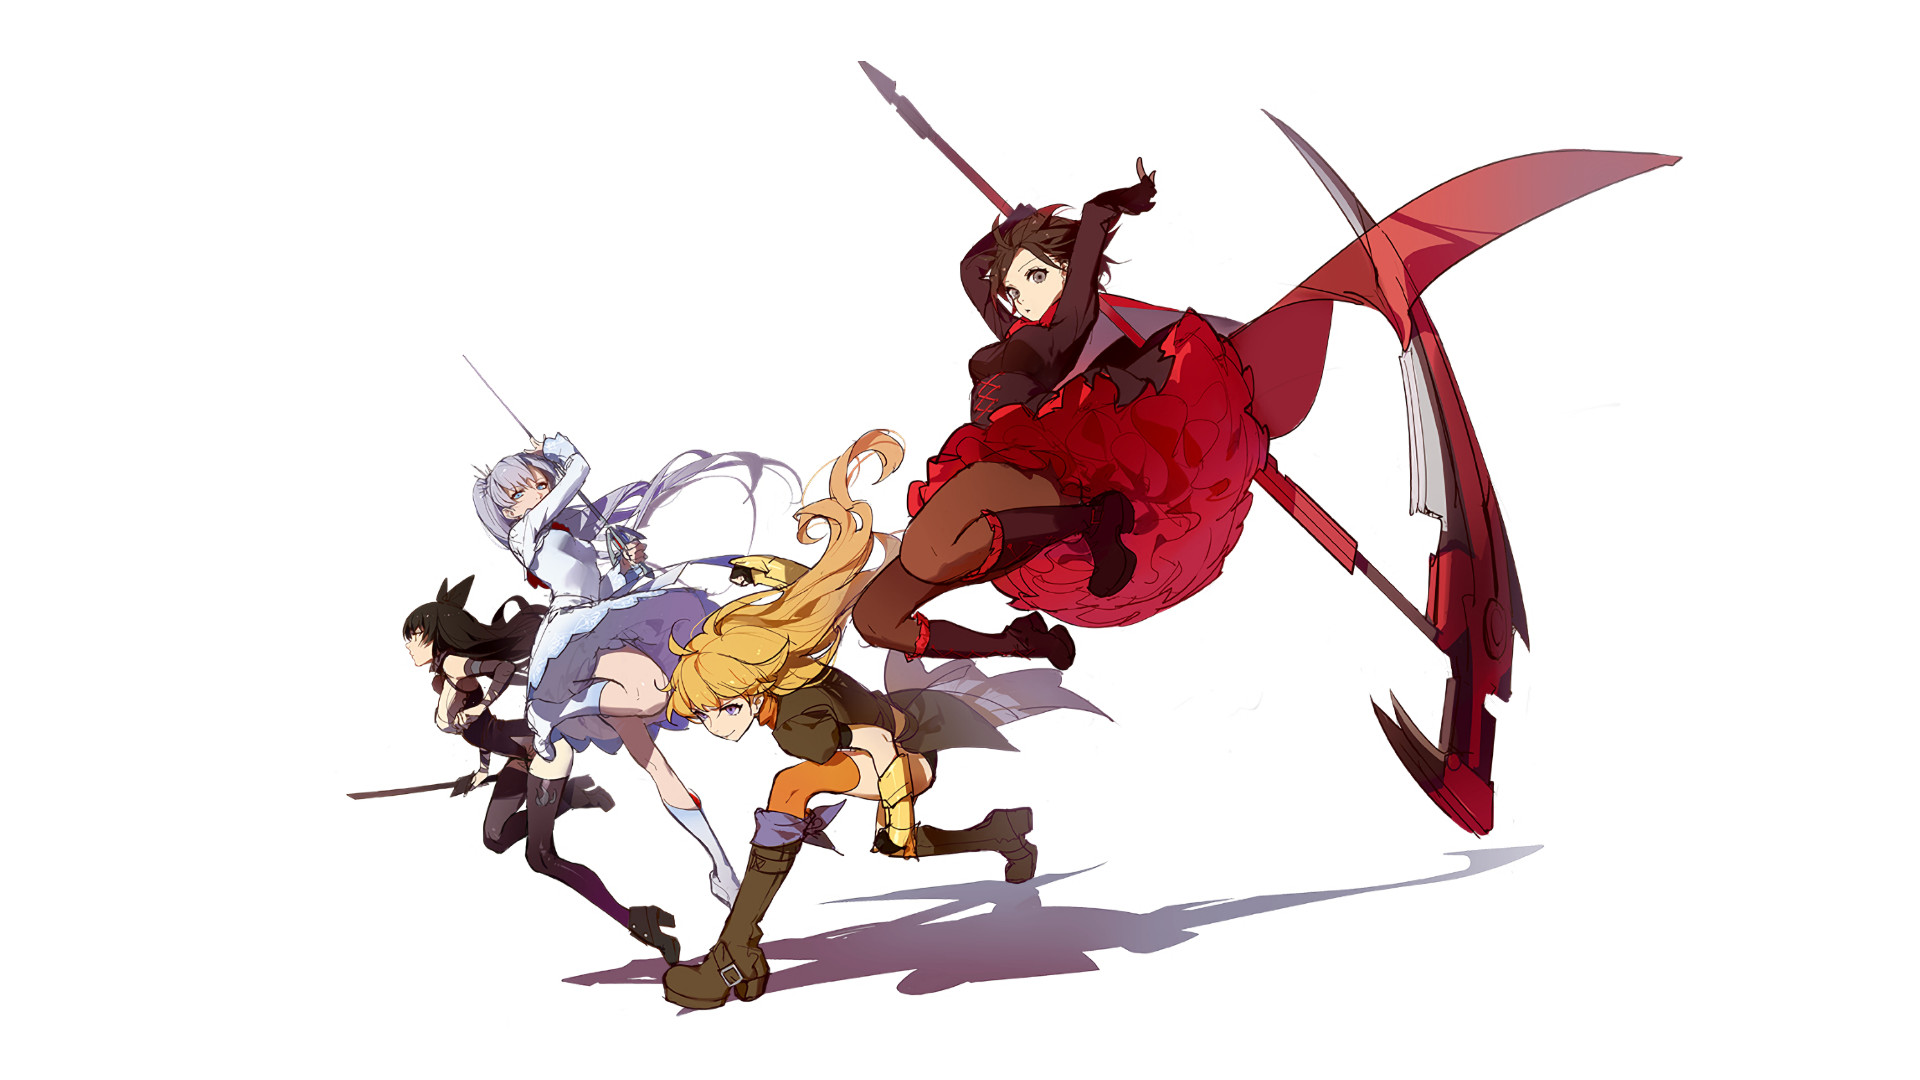 1920x1080 RWBY Girls [RWBY]() Need #iPhone #6S #Plus #Wallpaper/ #Background  for #IPhone6SPlus? Follow iPhone 6S Plus 3Wallpapers/ #Backgrounds Must…